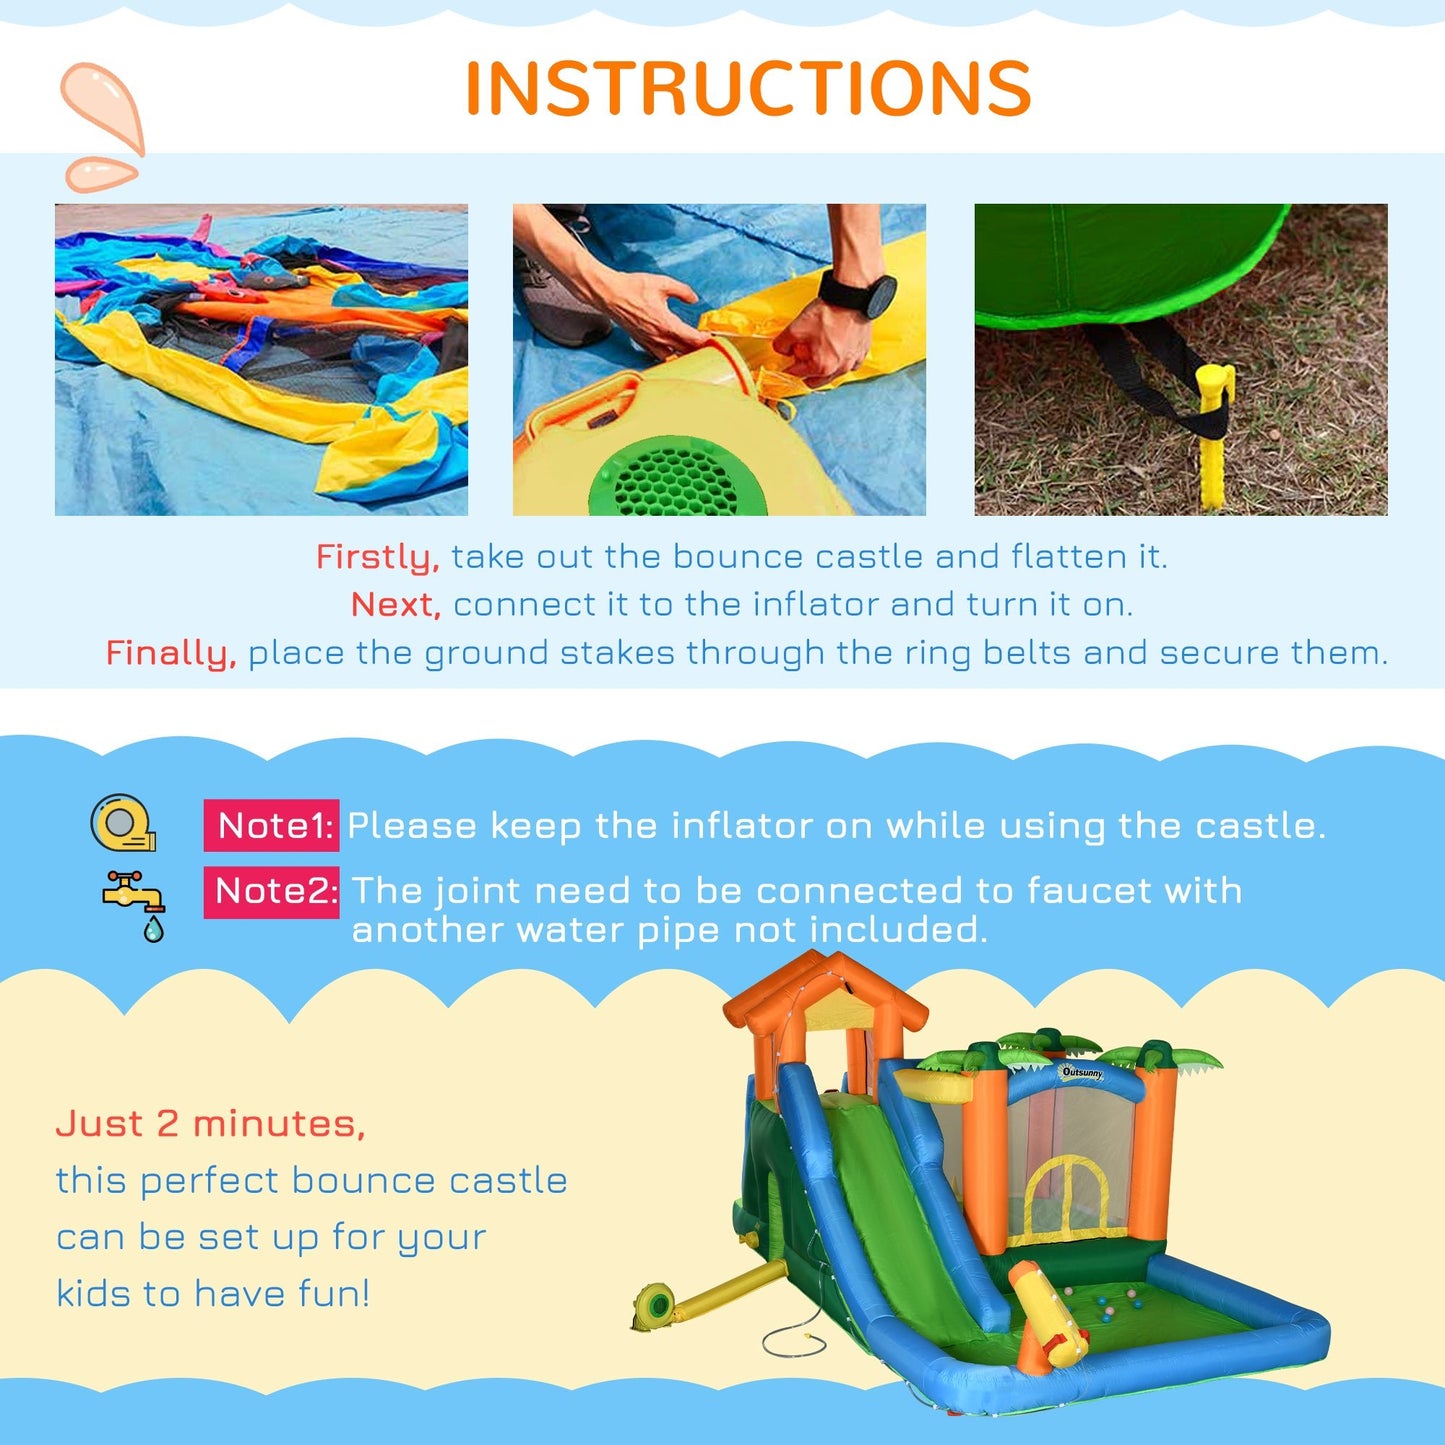 Miscellaneous-5-in-1 Inflatable Water Slide Kids Bounce House Summer Theme Jumping Castle Includes Slide Trampoline Pool Water Gun Climbing Wall - Outdoor Style Company